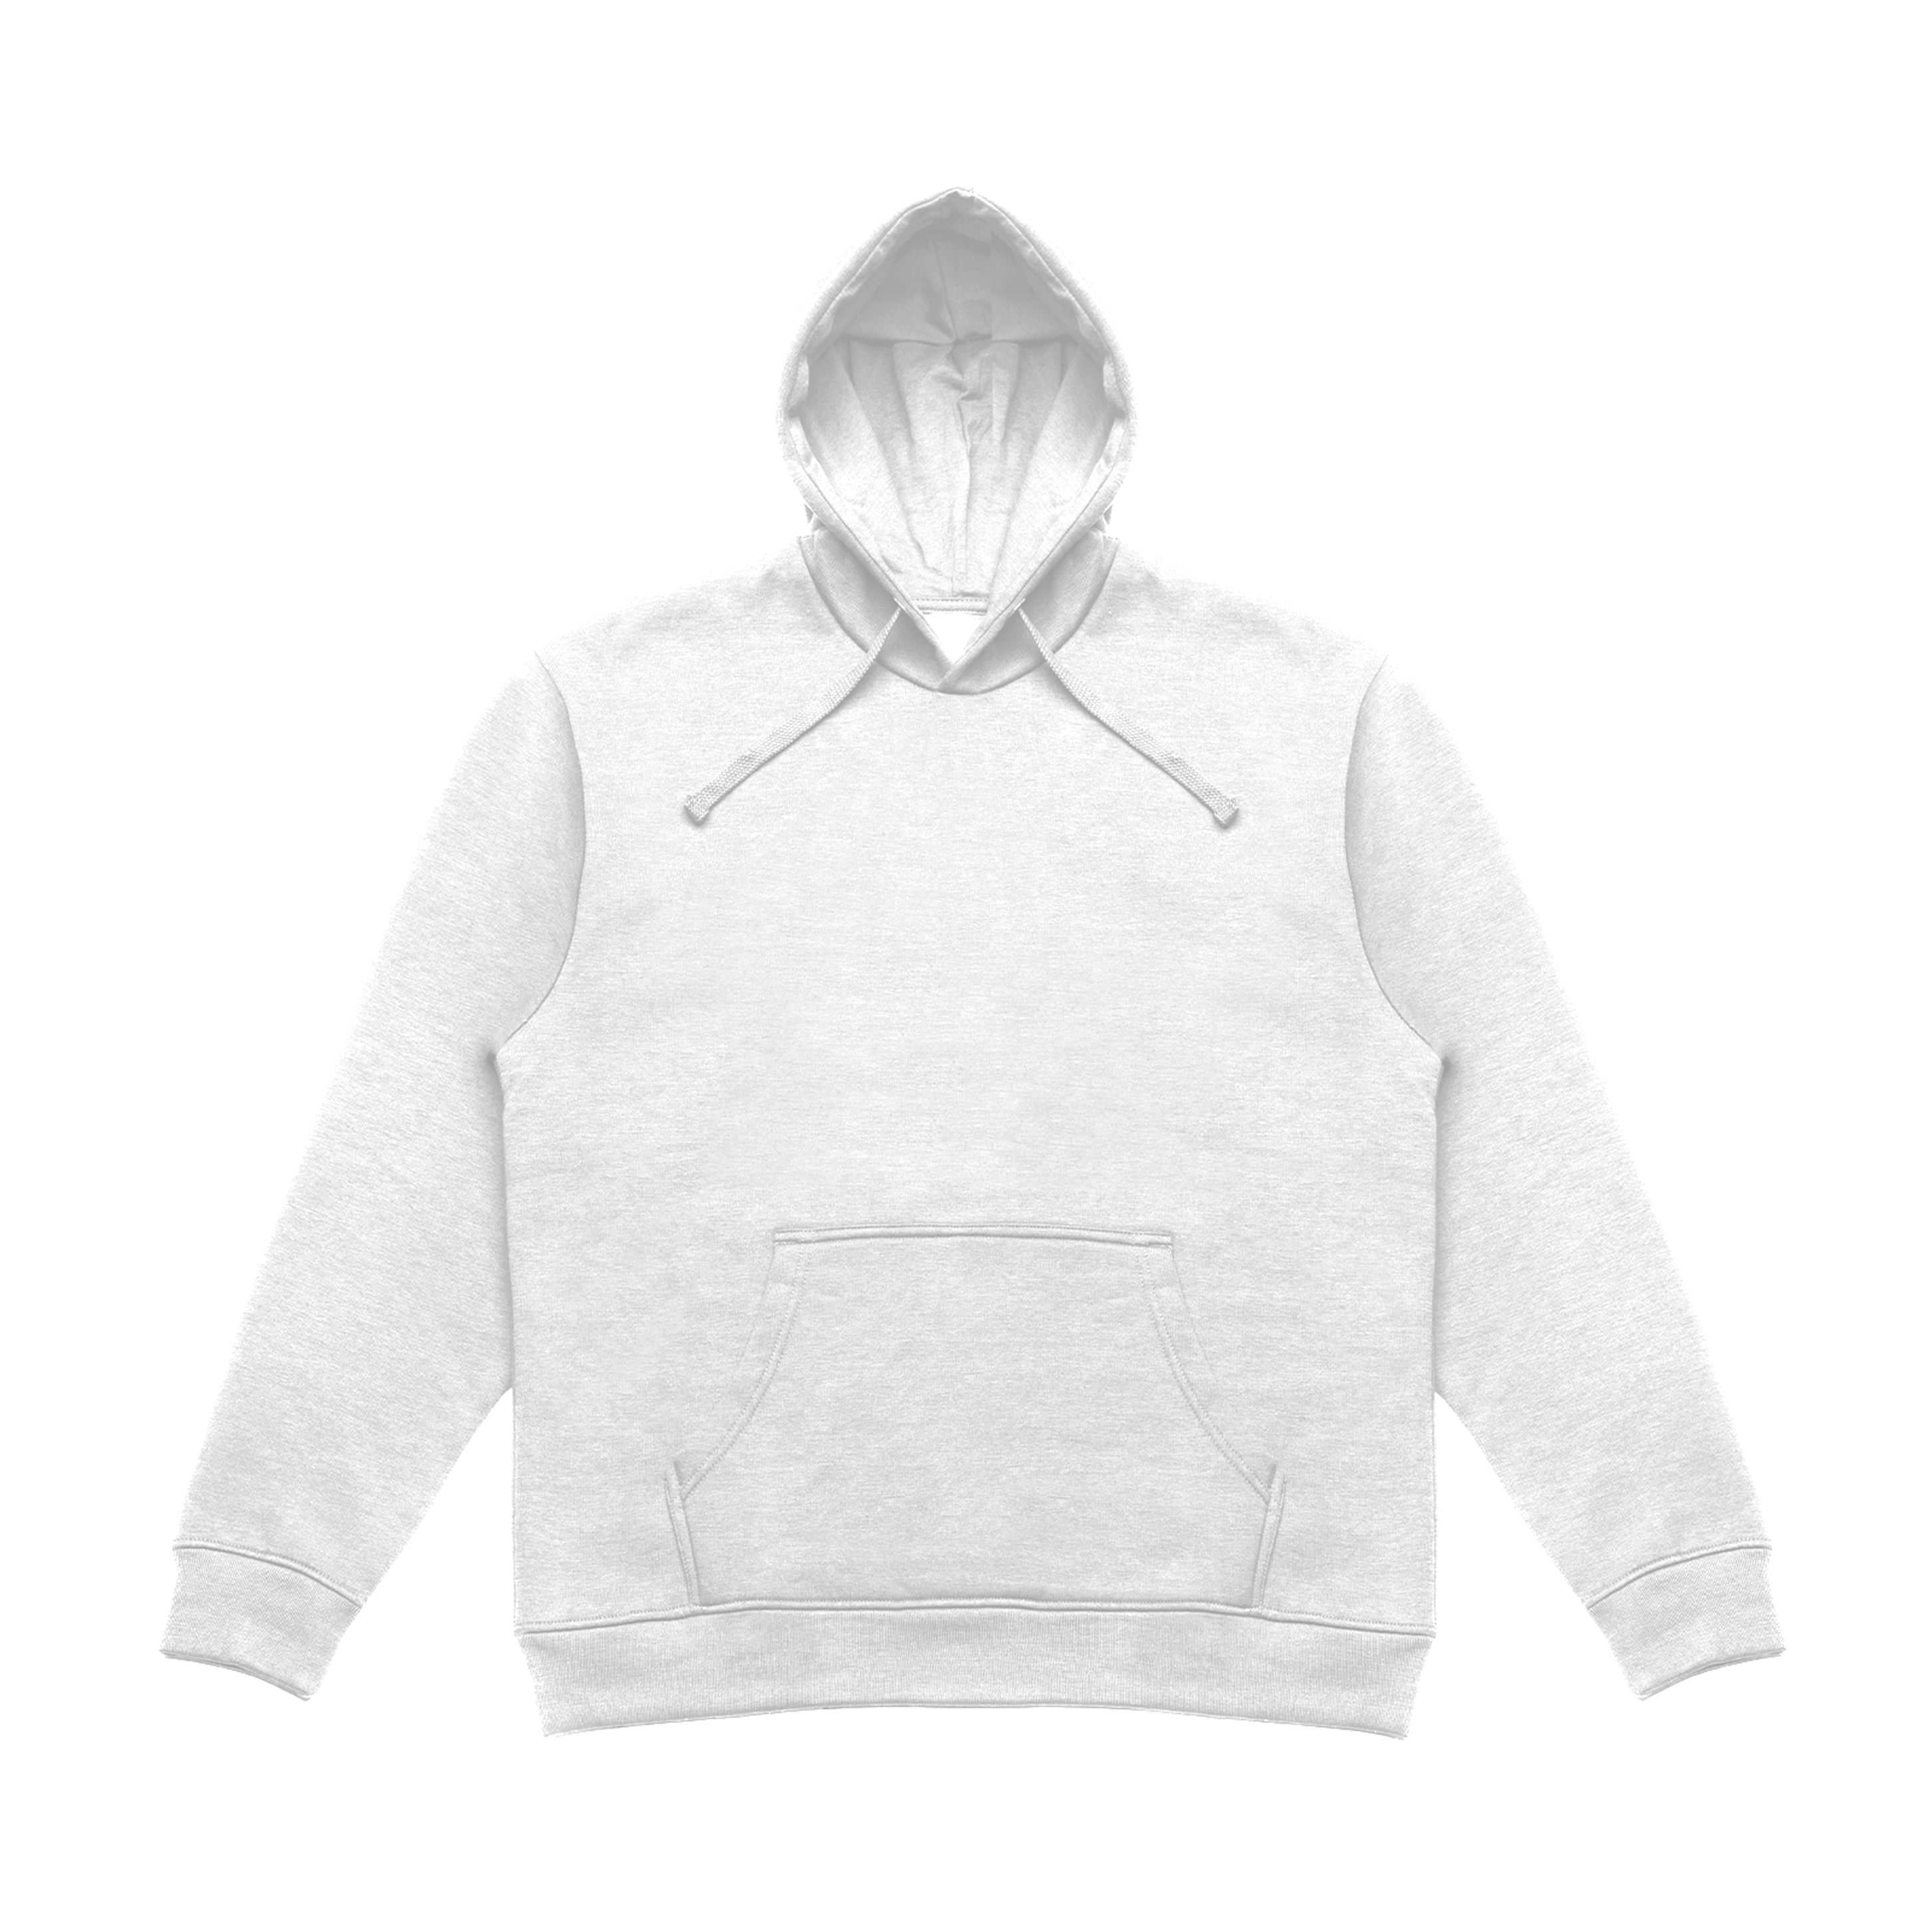 SS1024 Premium Pullover Hoodie - White [Wholesale]